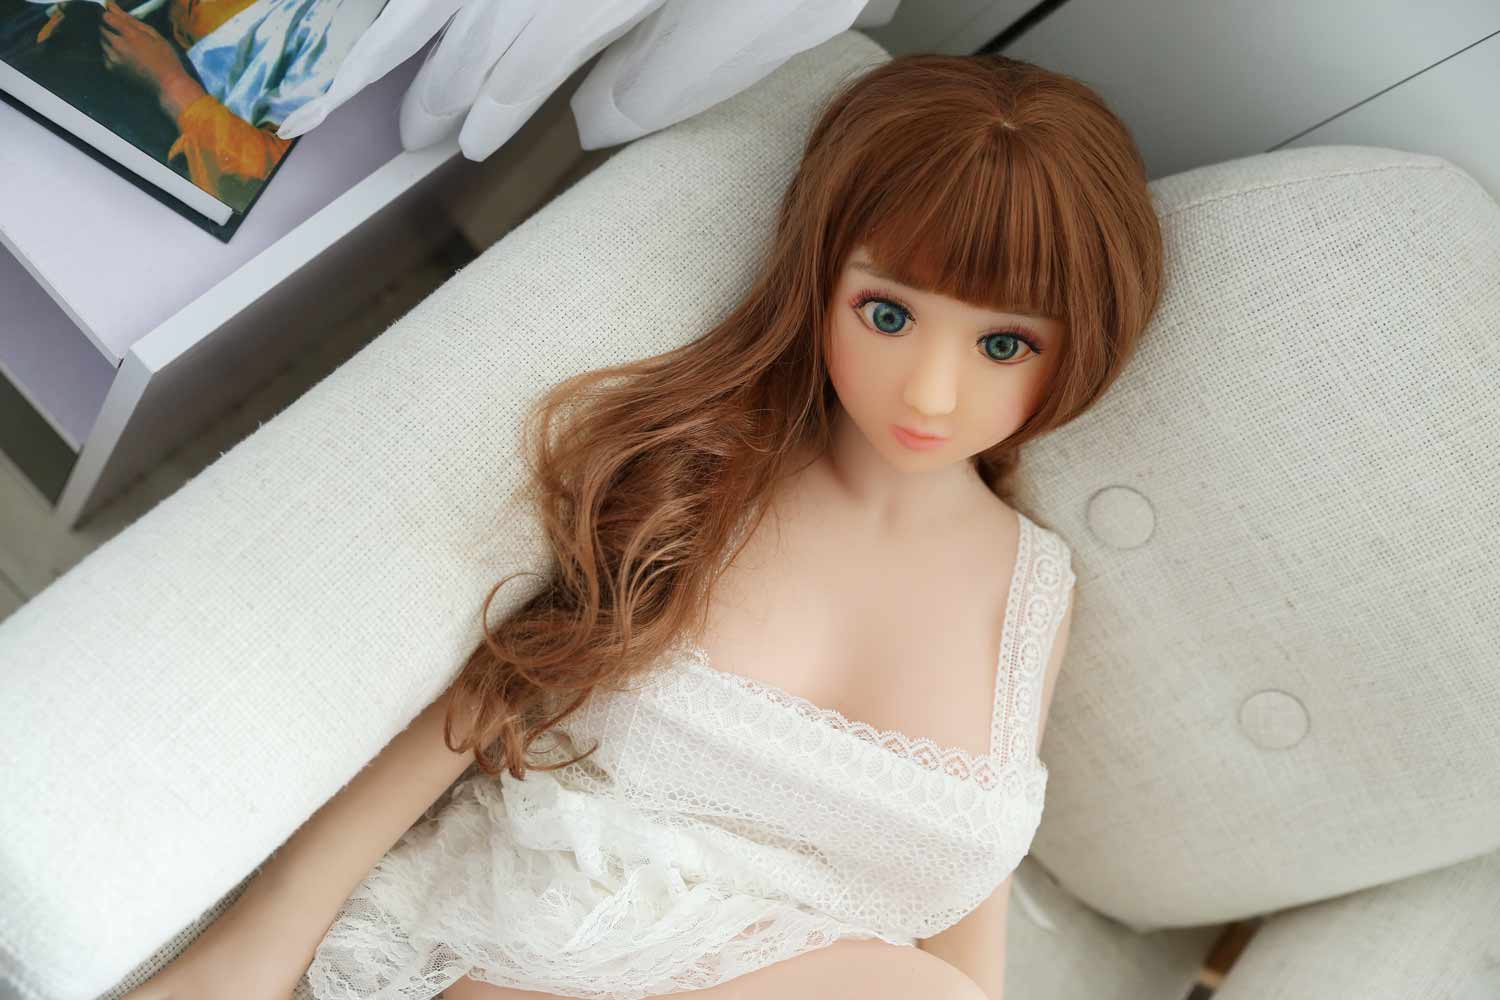 Mini sex doll leaning on the sofa